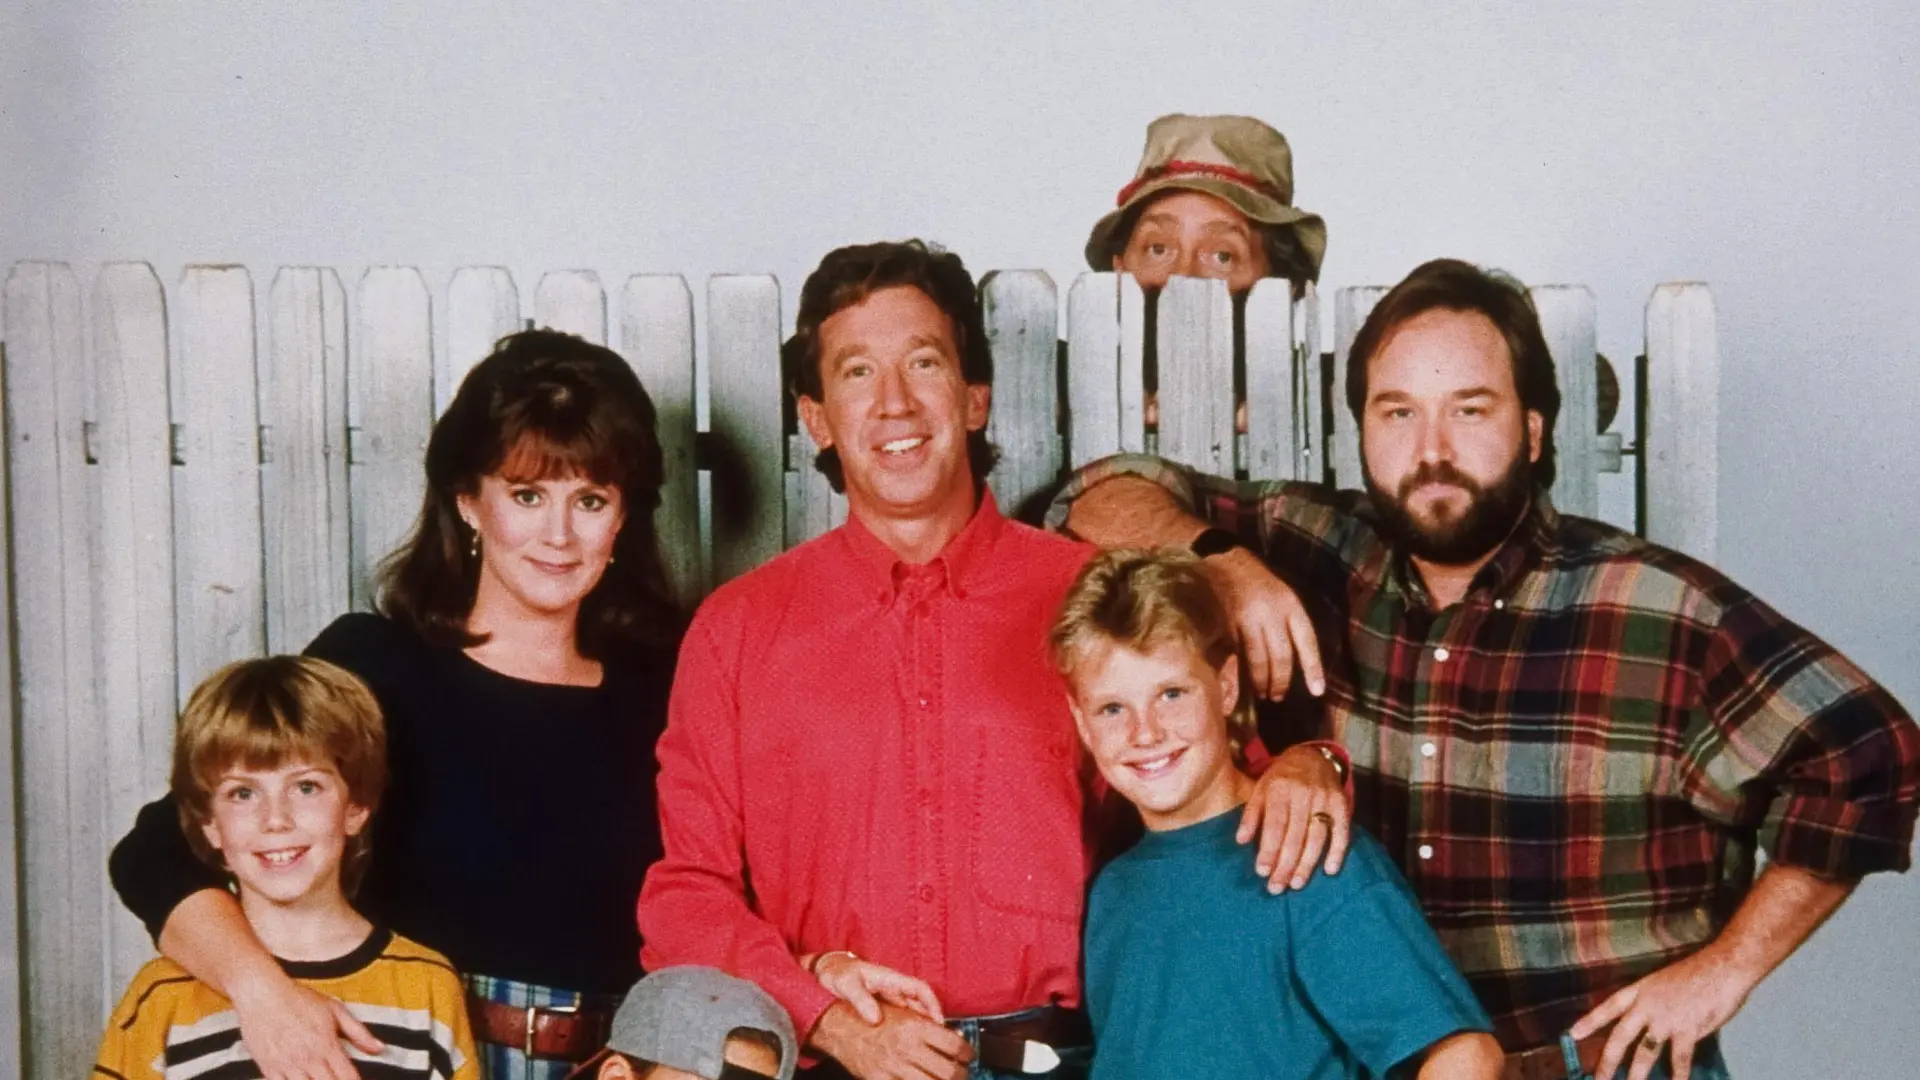 Home Improvement Reunion: See What the Cast Looks Like Today